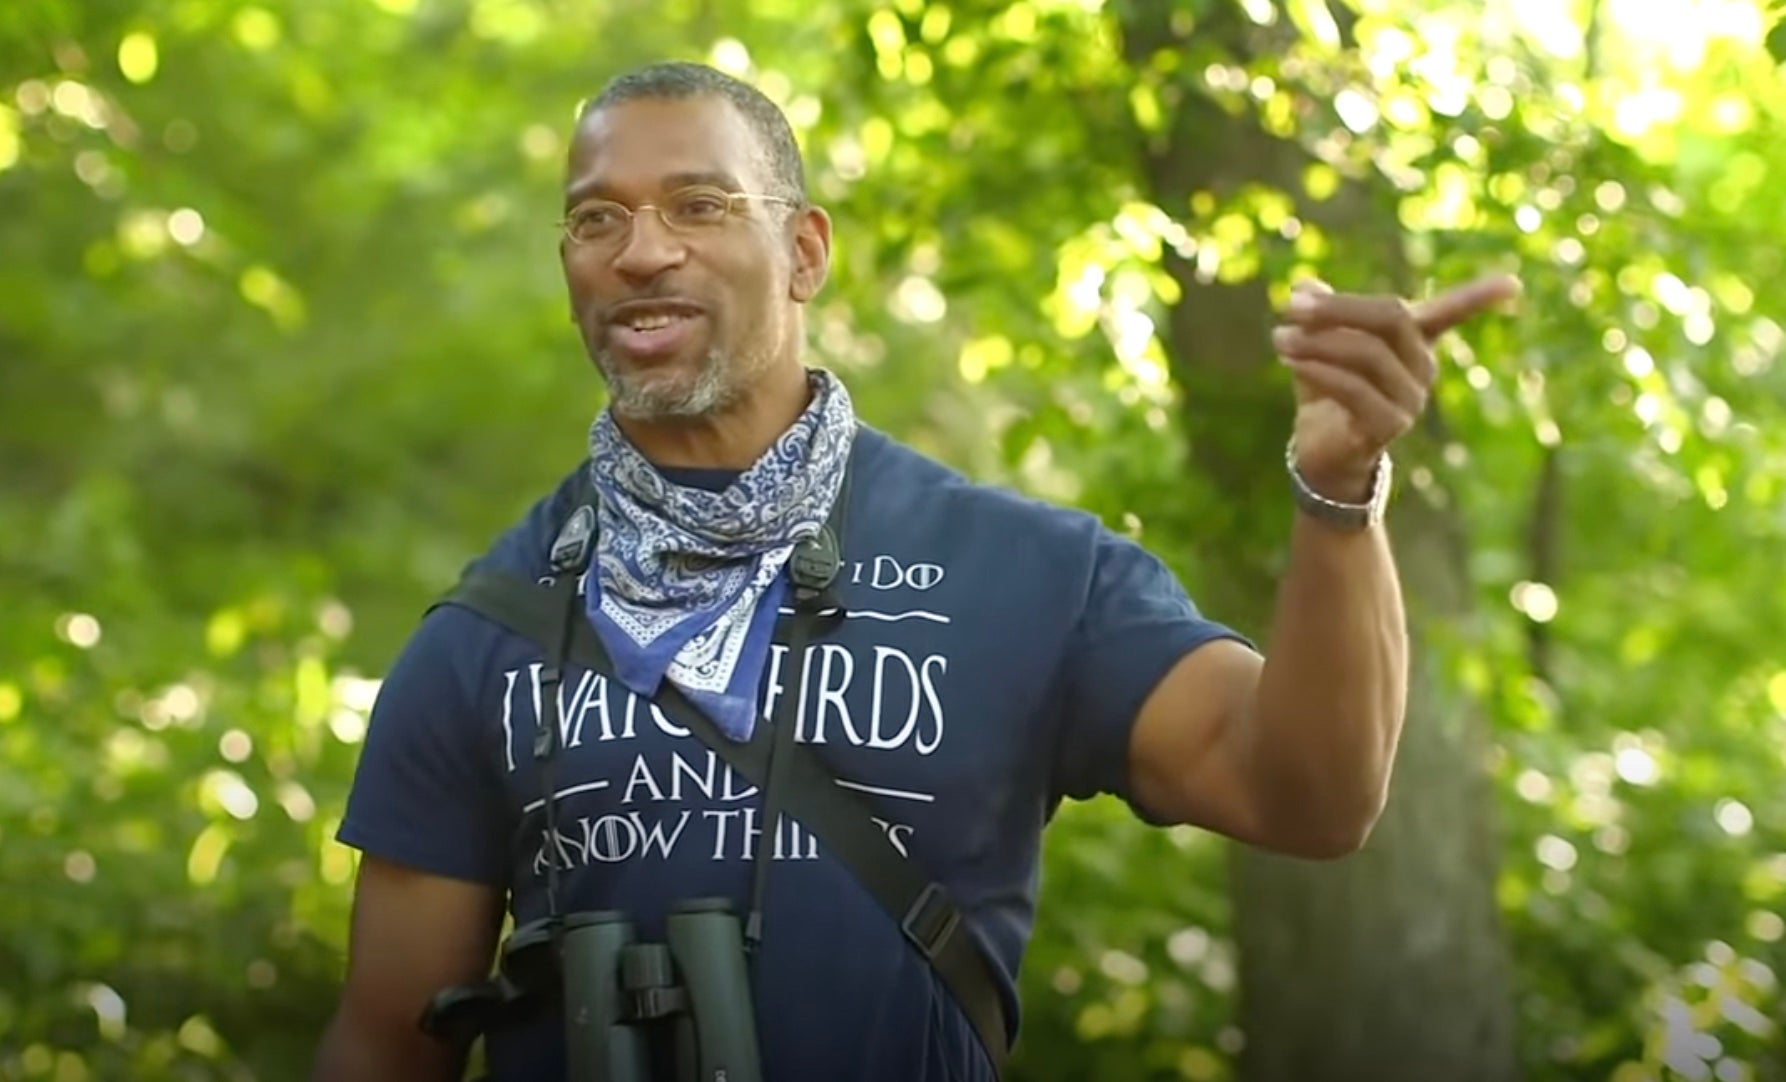 Birdwatcher Falsely Accused By White Woman In Central Park Lands NatGeo Show